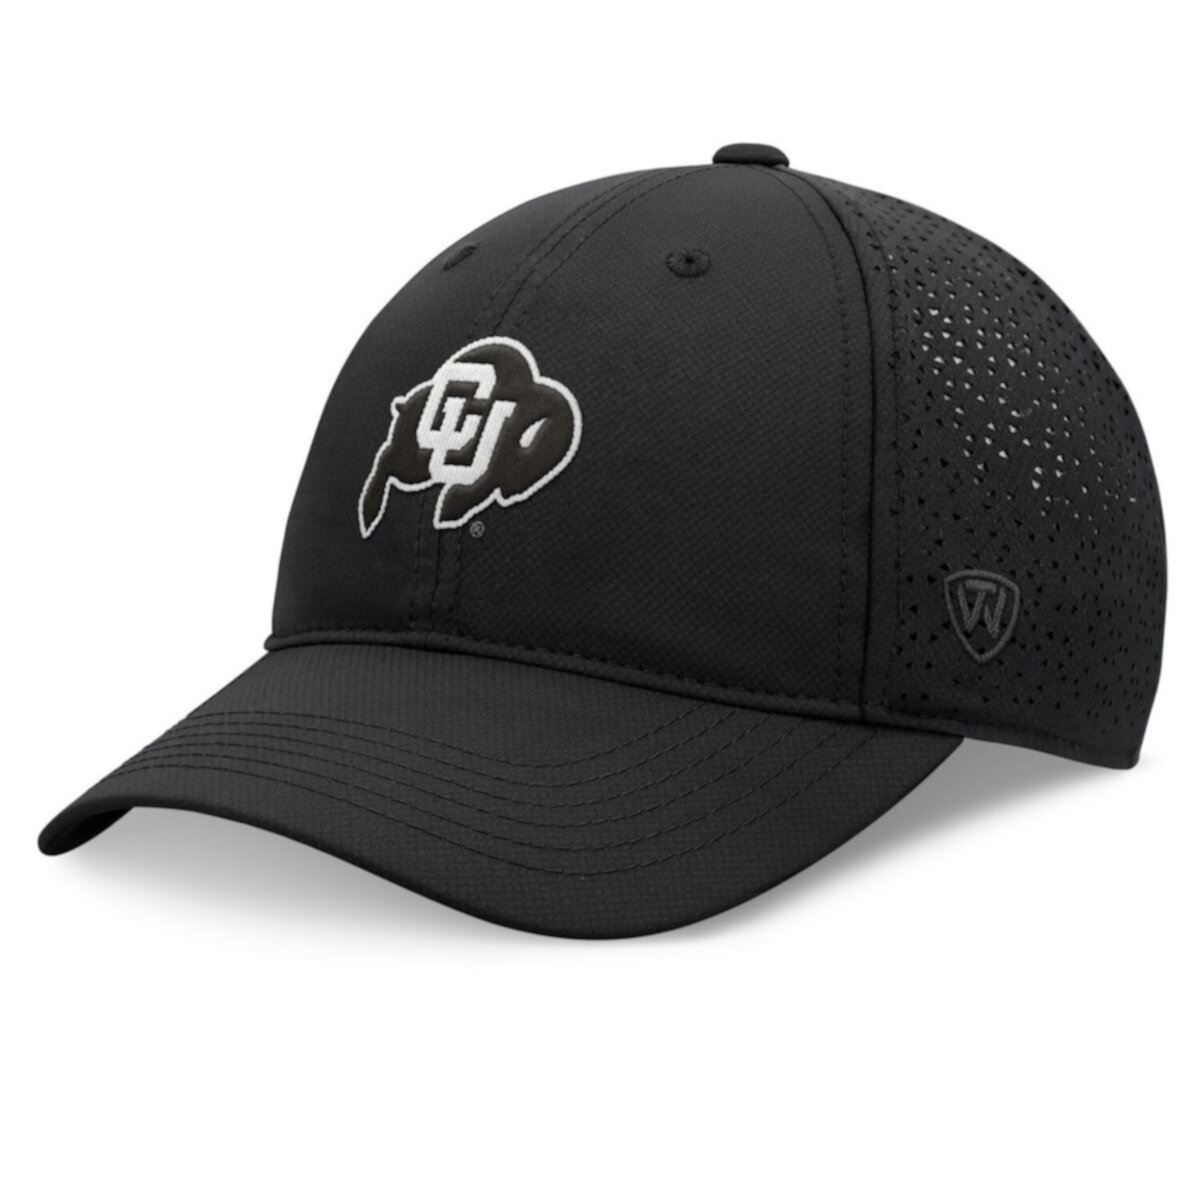 Men's Top of the World Black Colorado Buffaloes Liquesce Trucker Adjustable Hat Top of the World